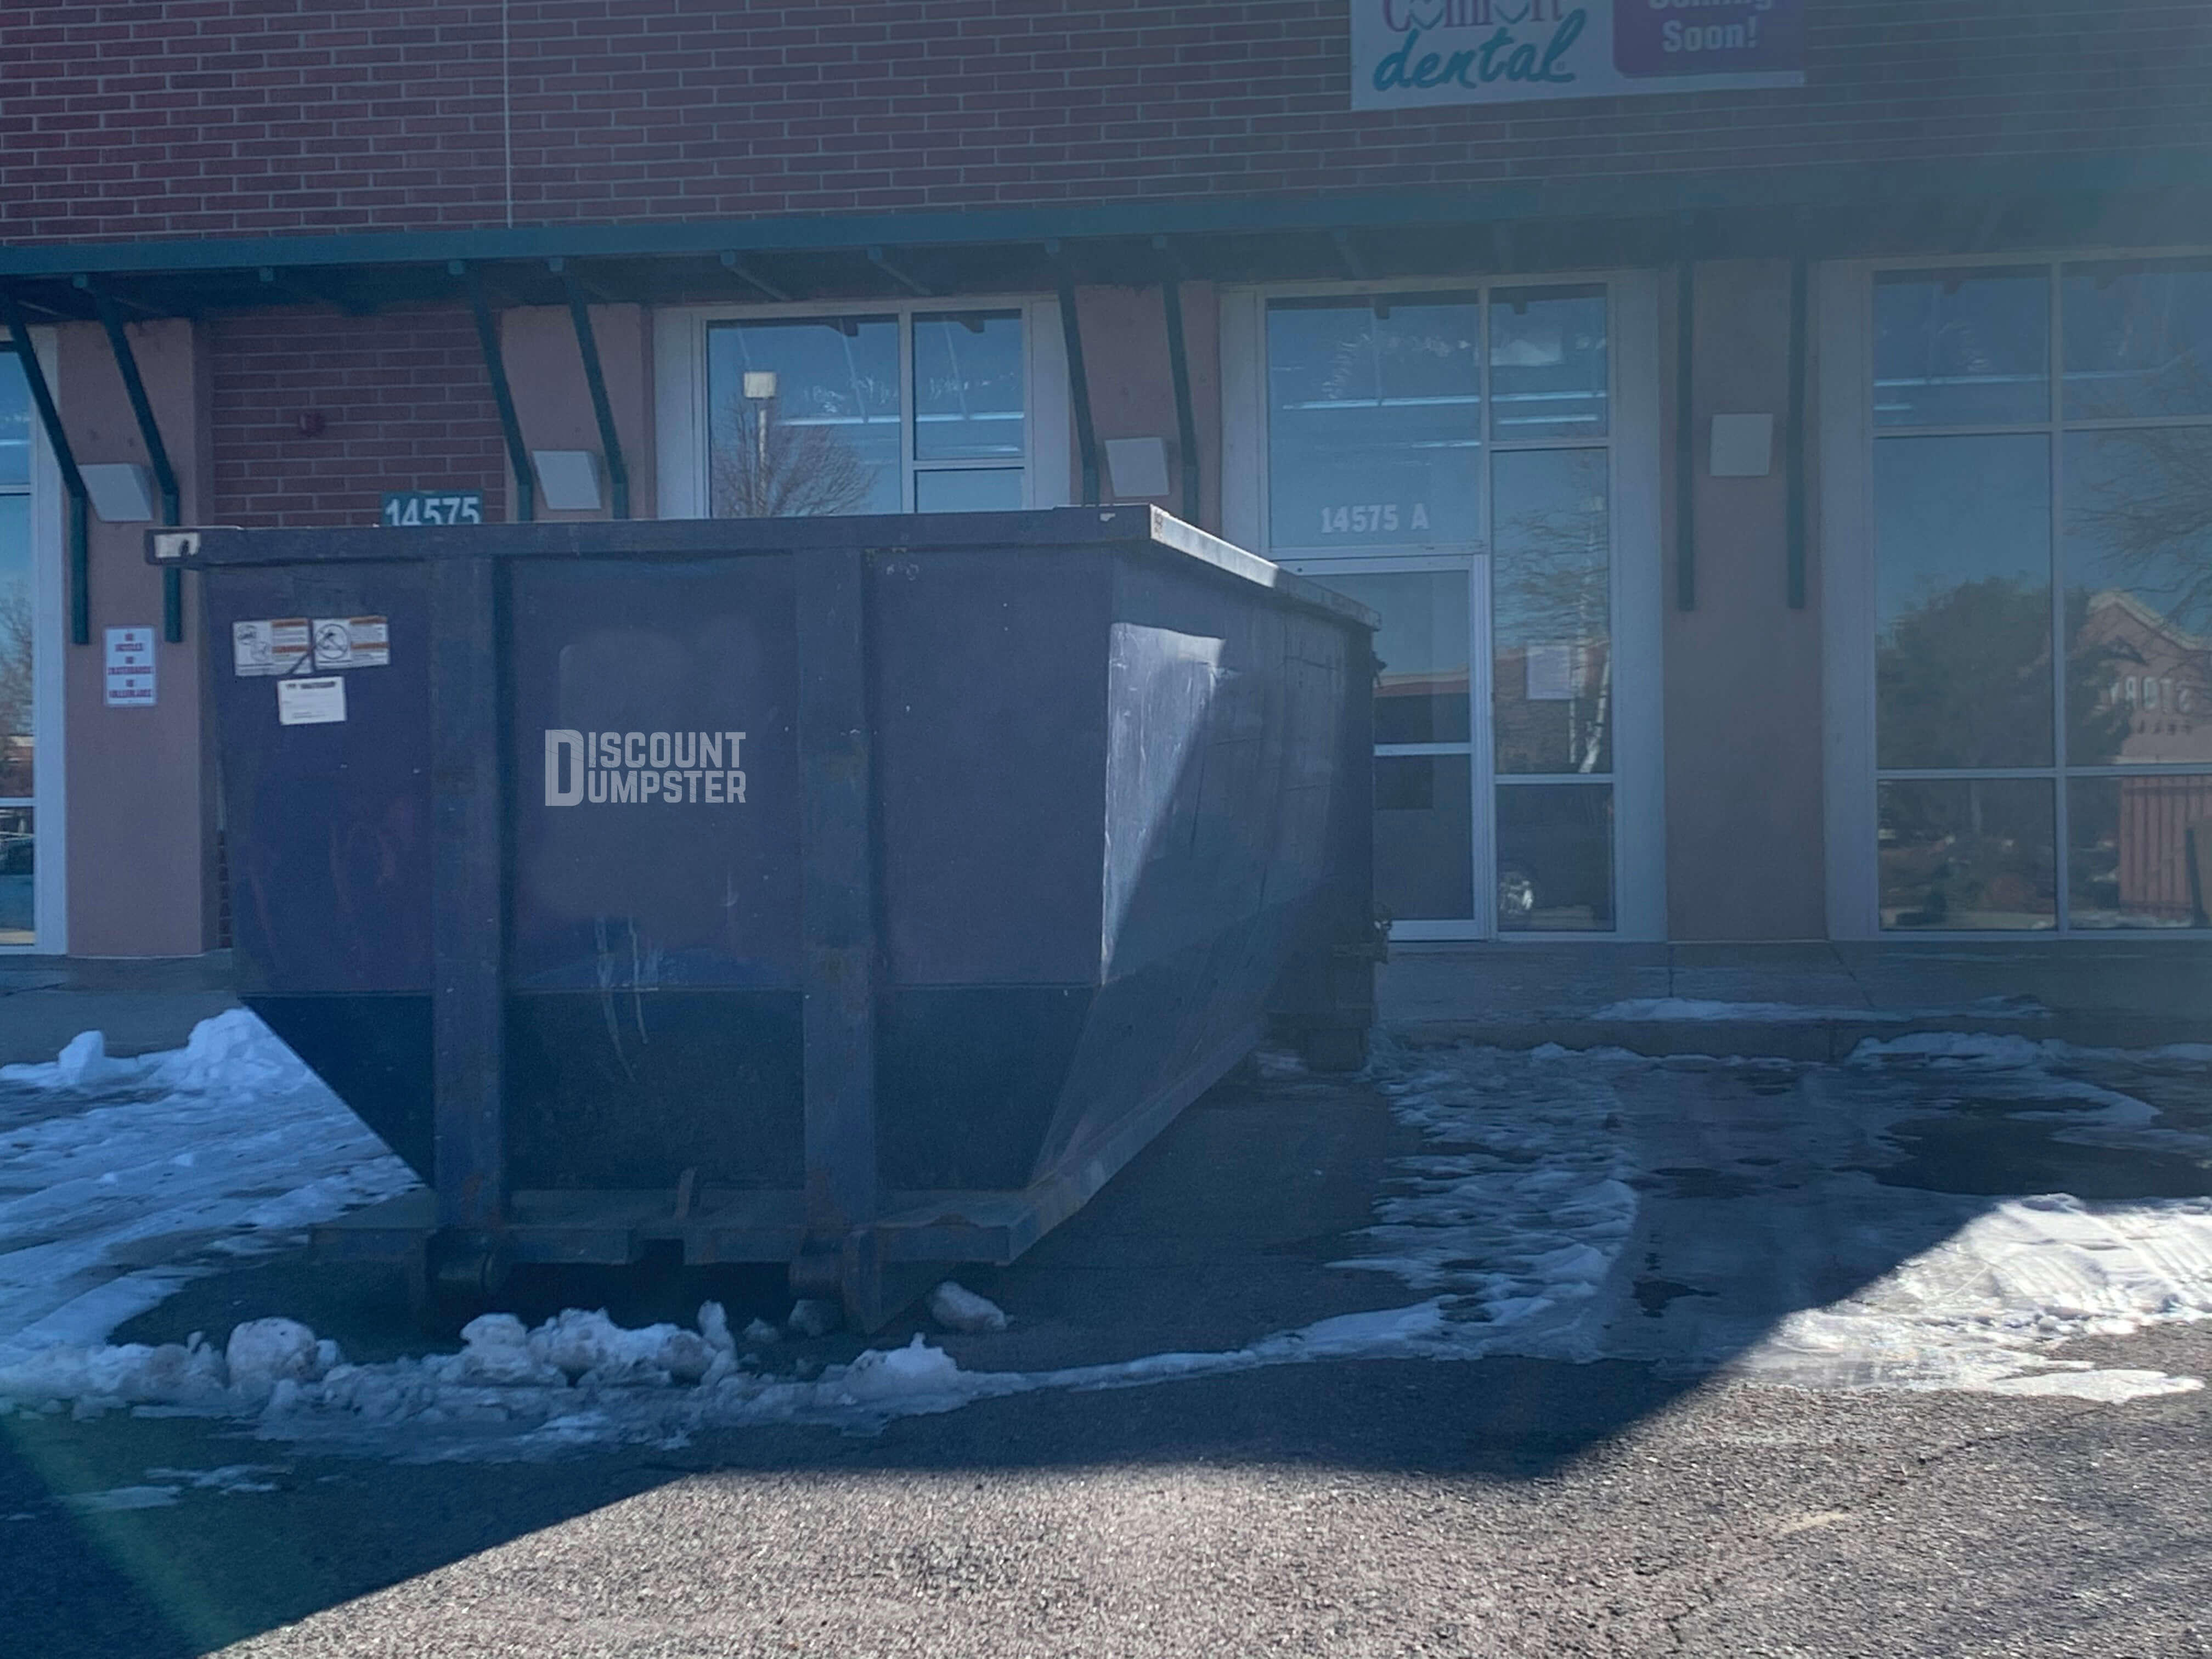 Discount dumpster has dumpsters for commercial waste removal in Denver co